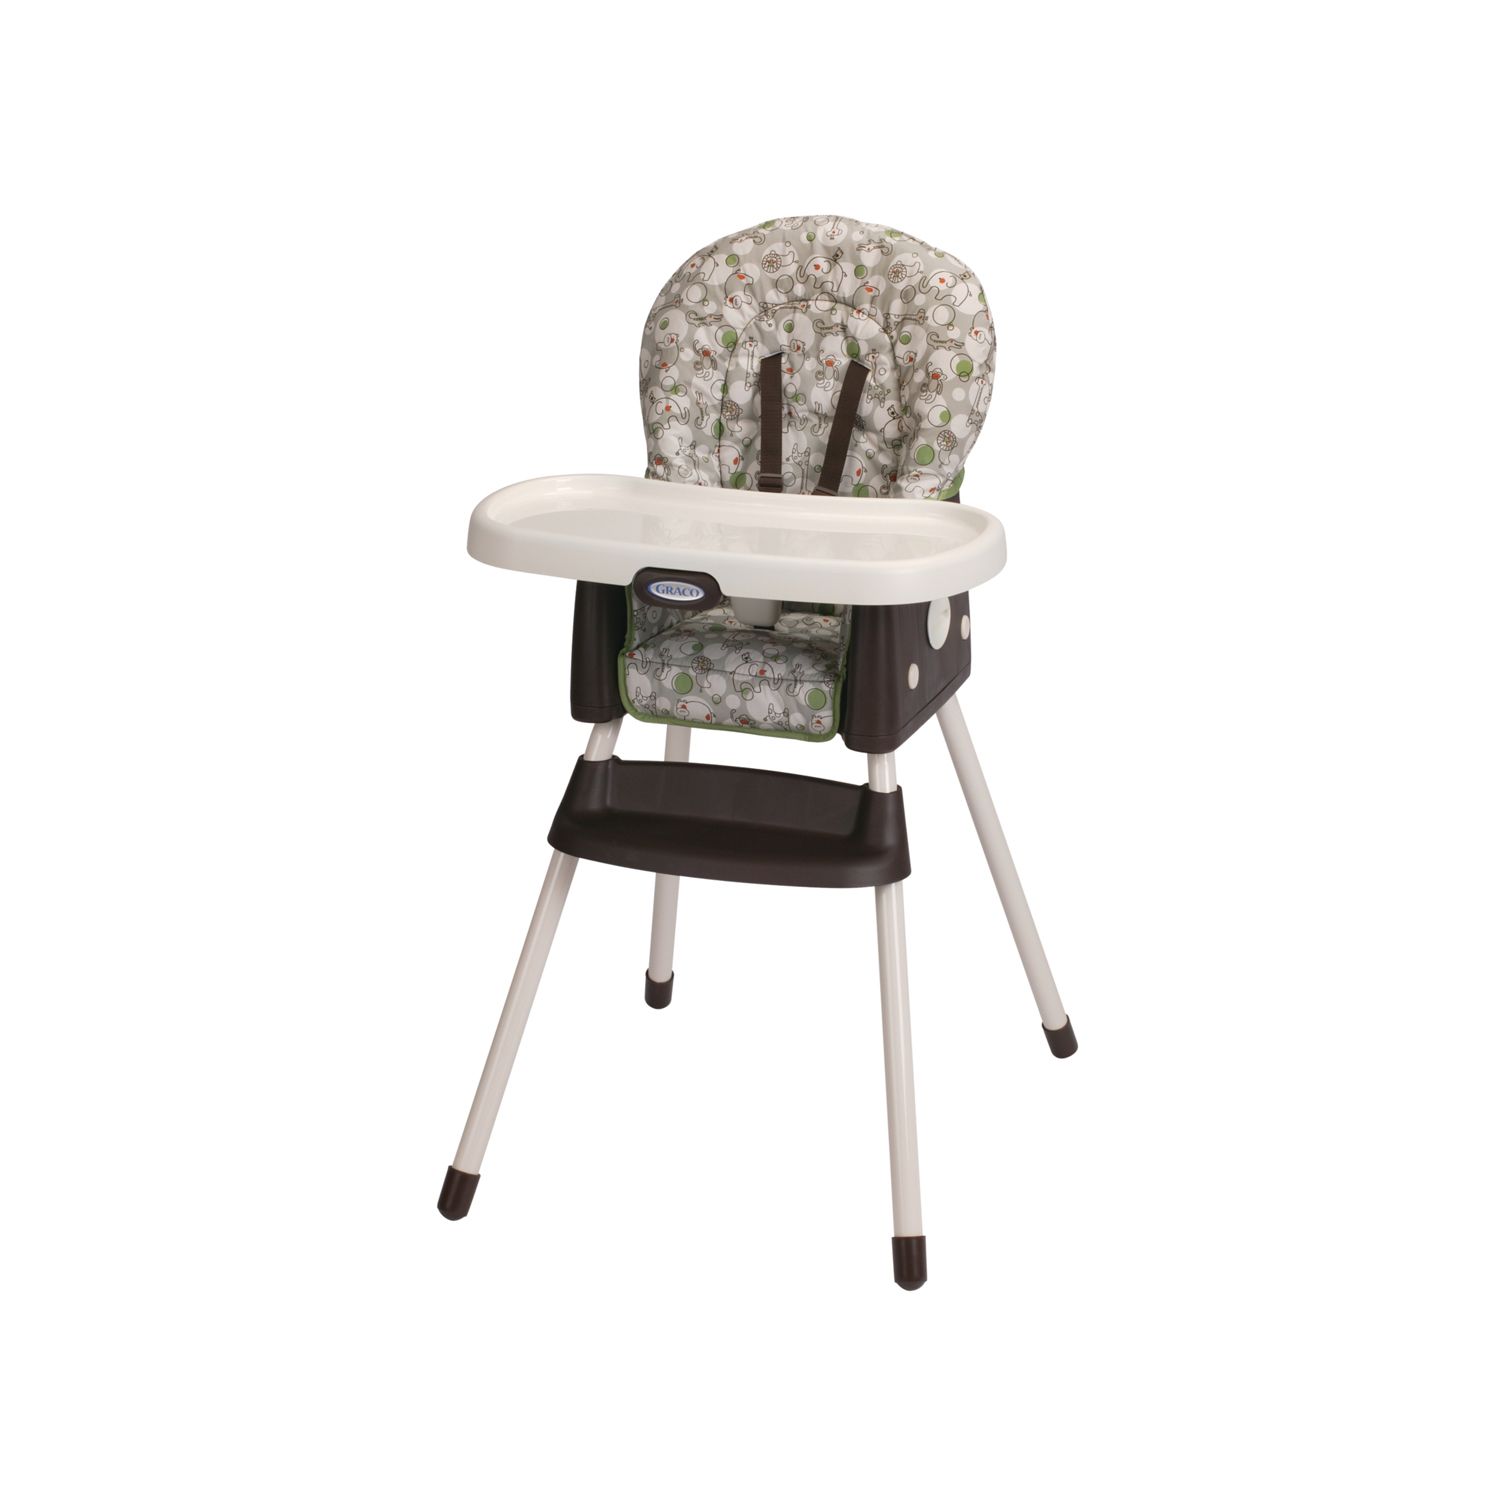 Graco SimpleSwitch 2-in-1 High Chair 